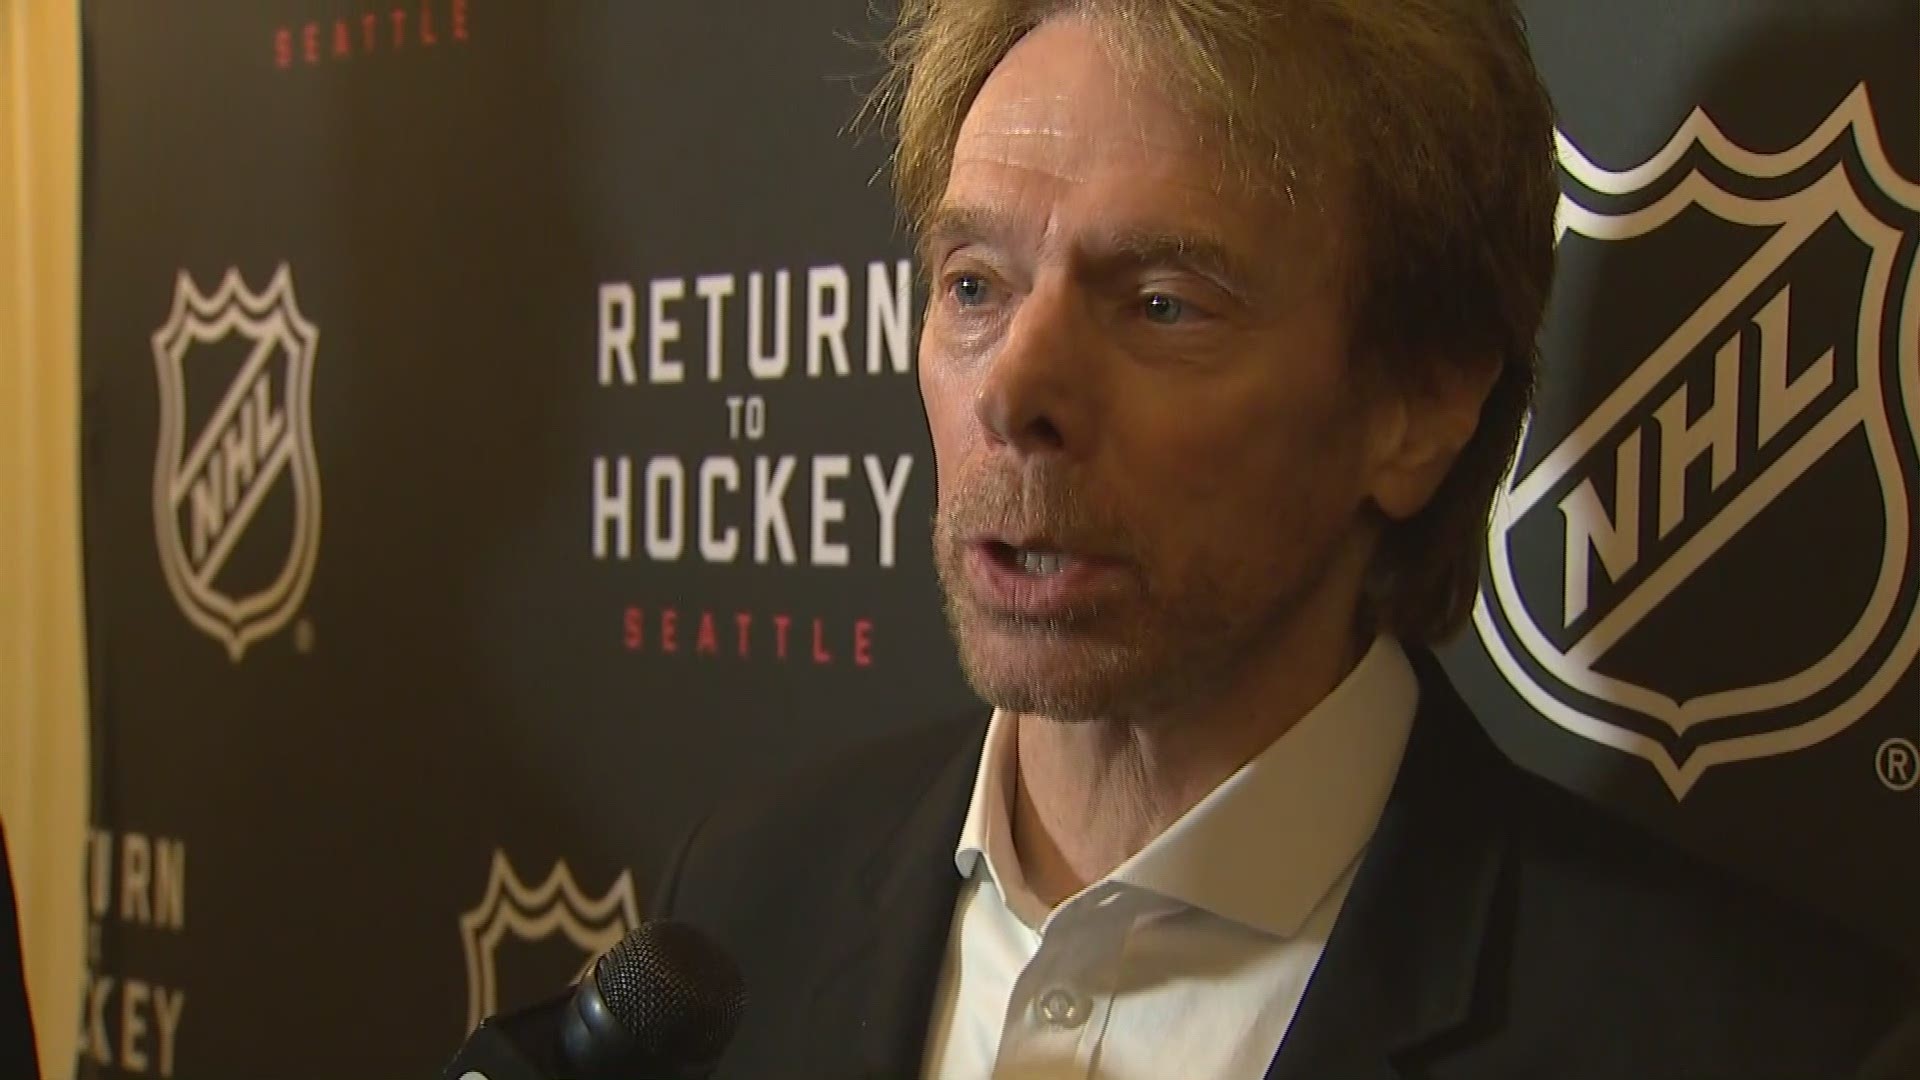 Hollywood producer Jerry Bruckheimer is part-owner of Seattle's new NHL team. Here's what he said after the big announcement to KING 5's Chris Daniels